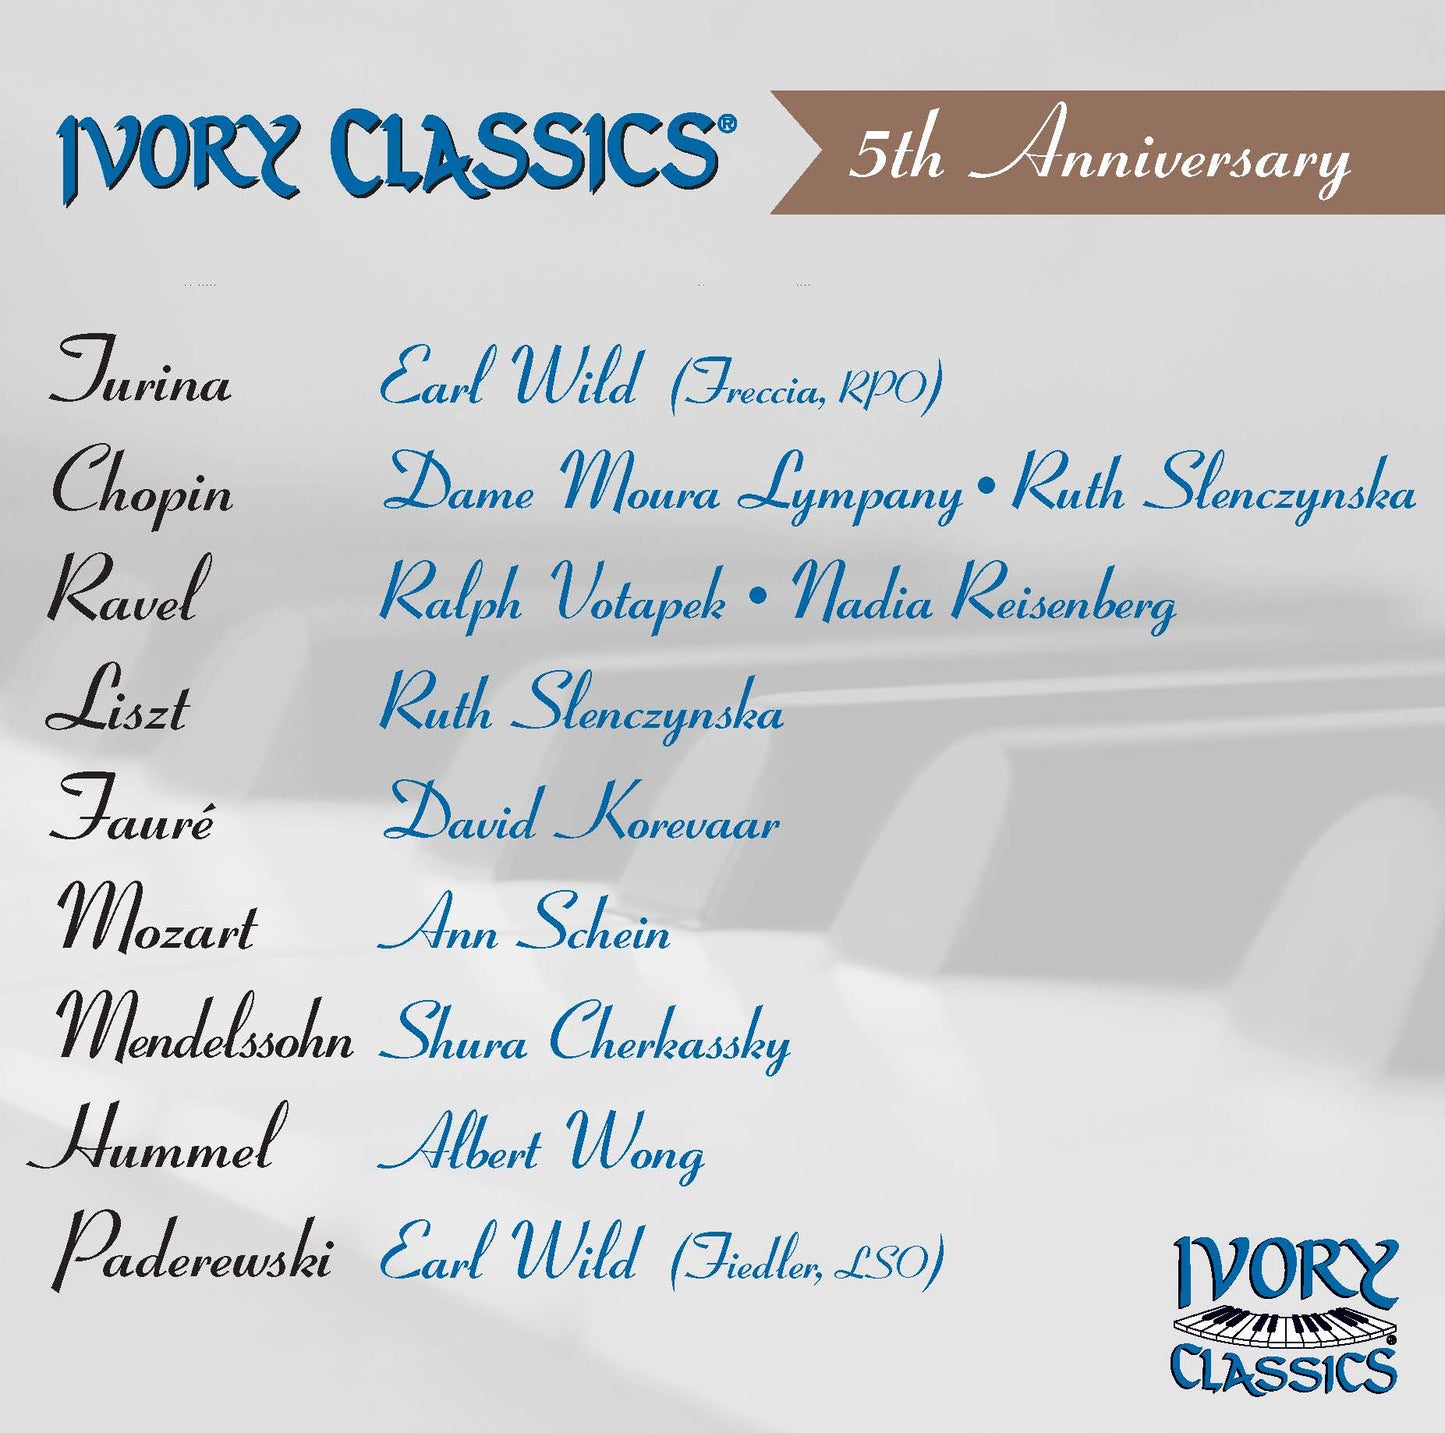 Ivory Classics 5th Anniversary CD - various pianists